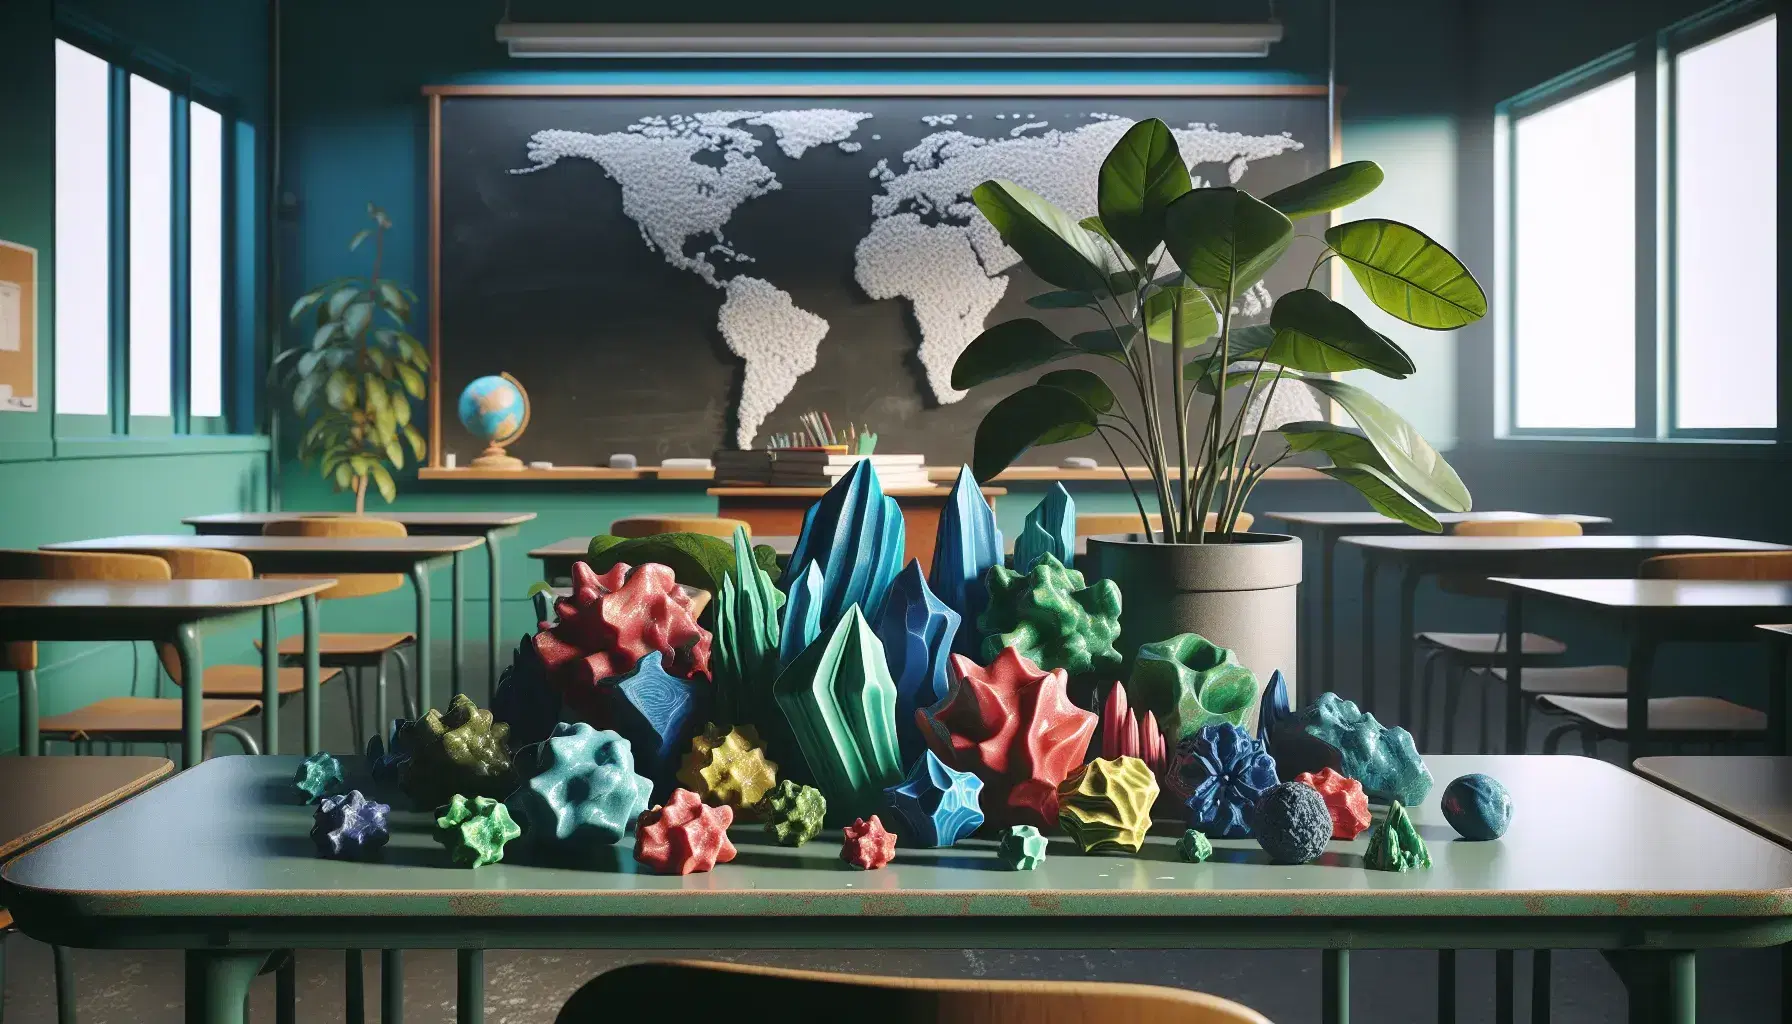 Colorful crystal-like objects on a teacher's desk in a classroom with a blank chalkboard, a lush potted plant, and a nondescript globe.